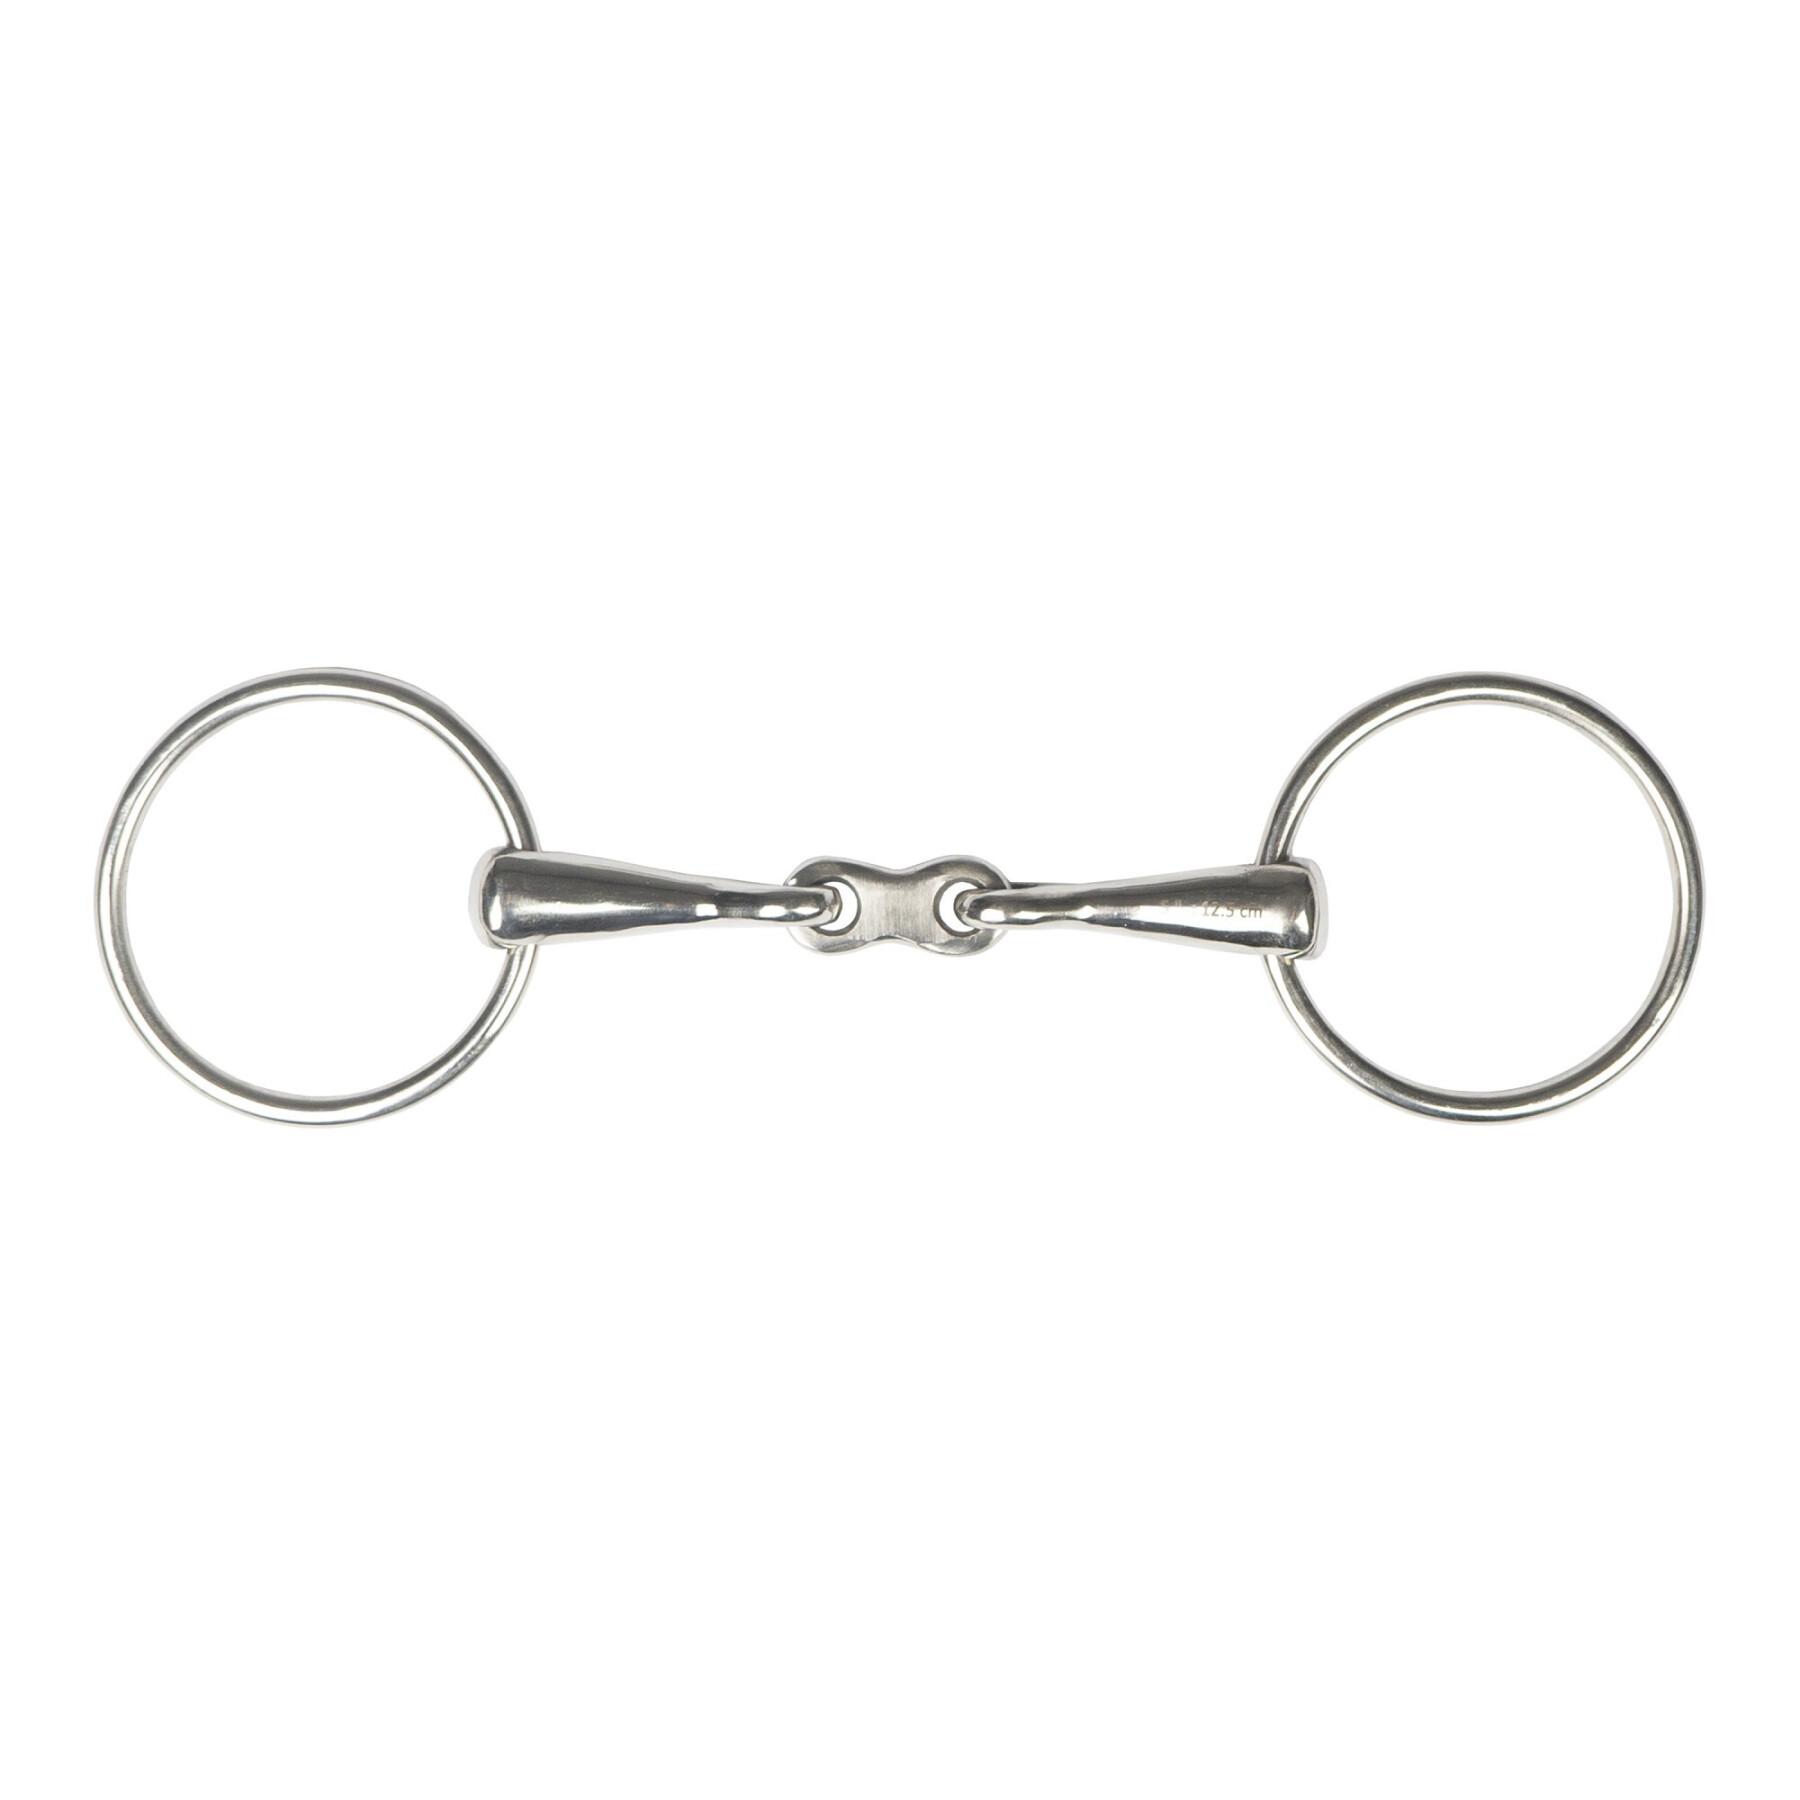 Two-ring snaffle bit Horka 16mm